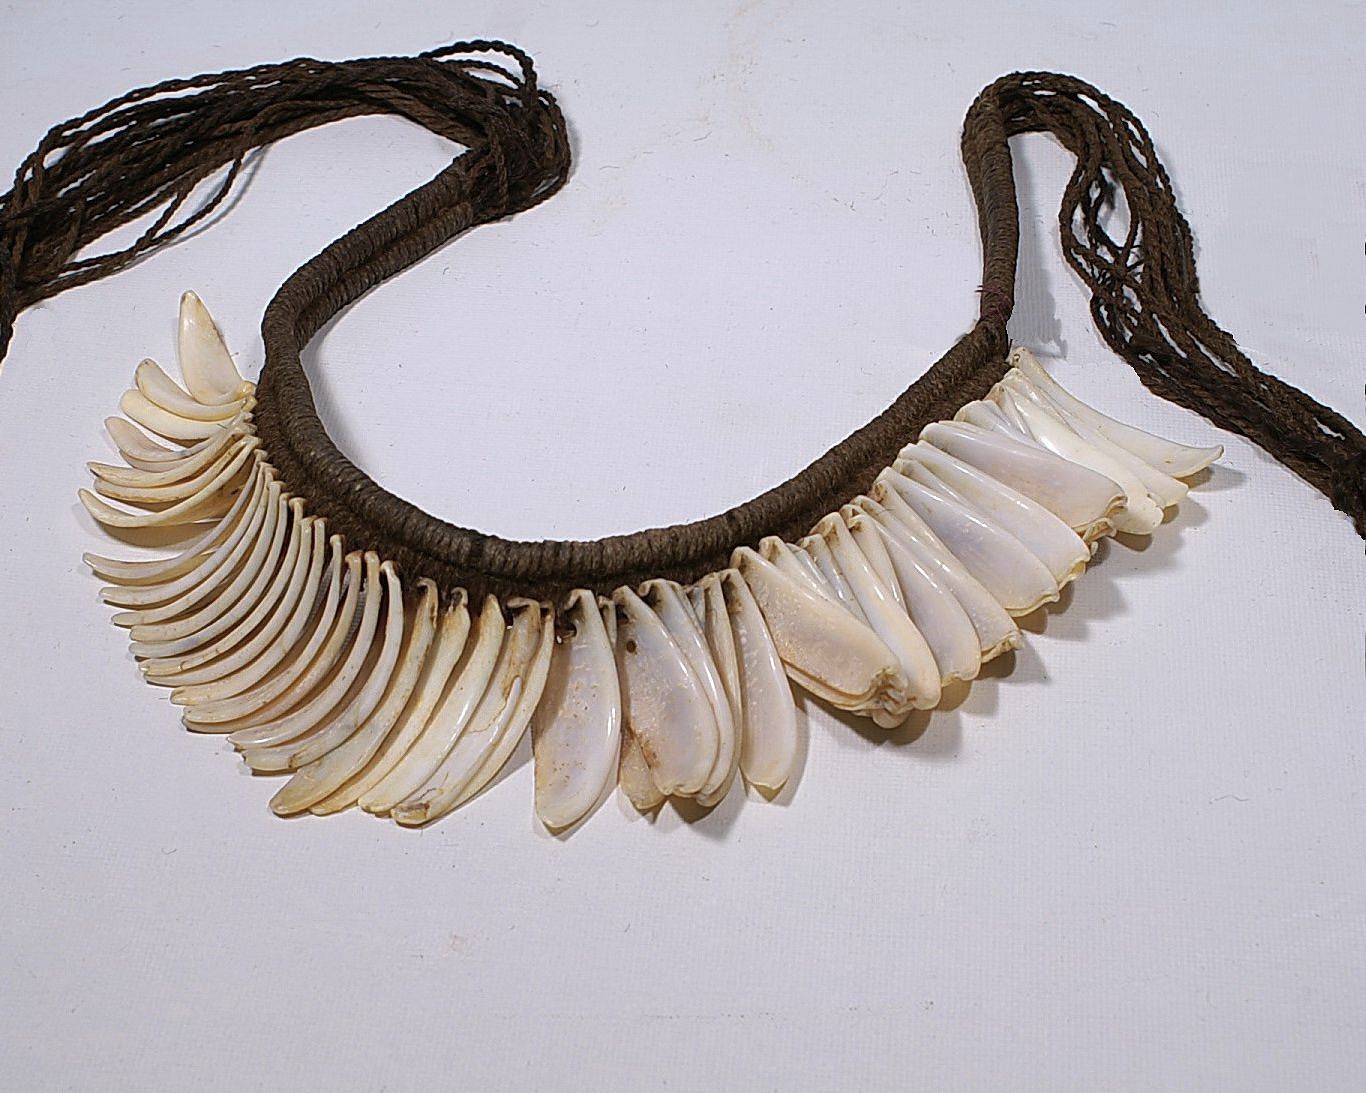 Peru, Nazca shell Necklace on Original Alpaca Cord
It is very rare to find a shell necklace with original stringing intact.   This necklace is an excellent example of the Nasca culture's ingenuity in using the local marine resources.   Each of the 55 shells is intricately tied to an elaborately knotted foundation cord. The shell appears to be a mussel or razor clam.  A similar necklace is in the American Museum of Natural History.
Media: Shell
$3,200
99177